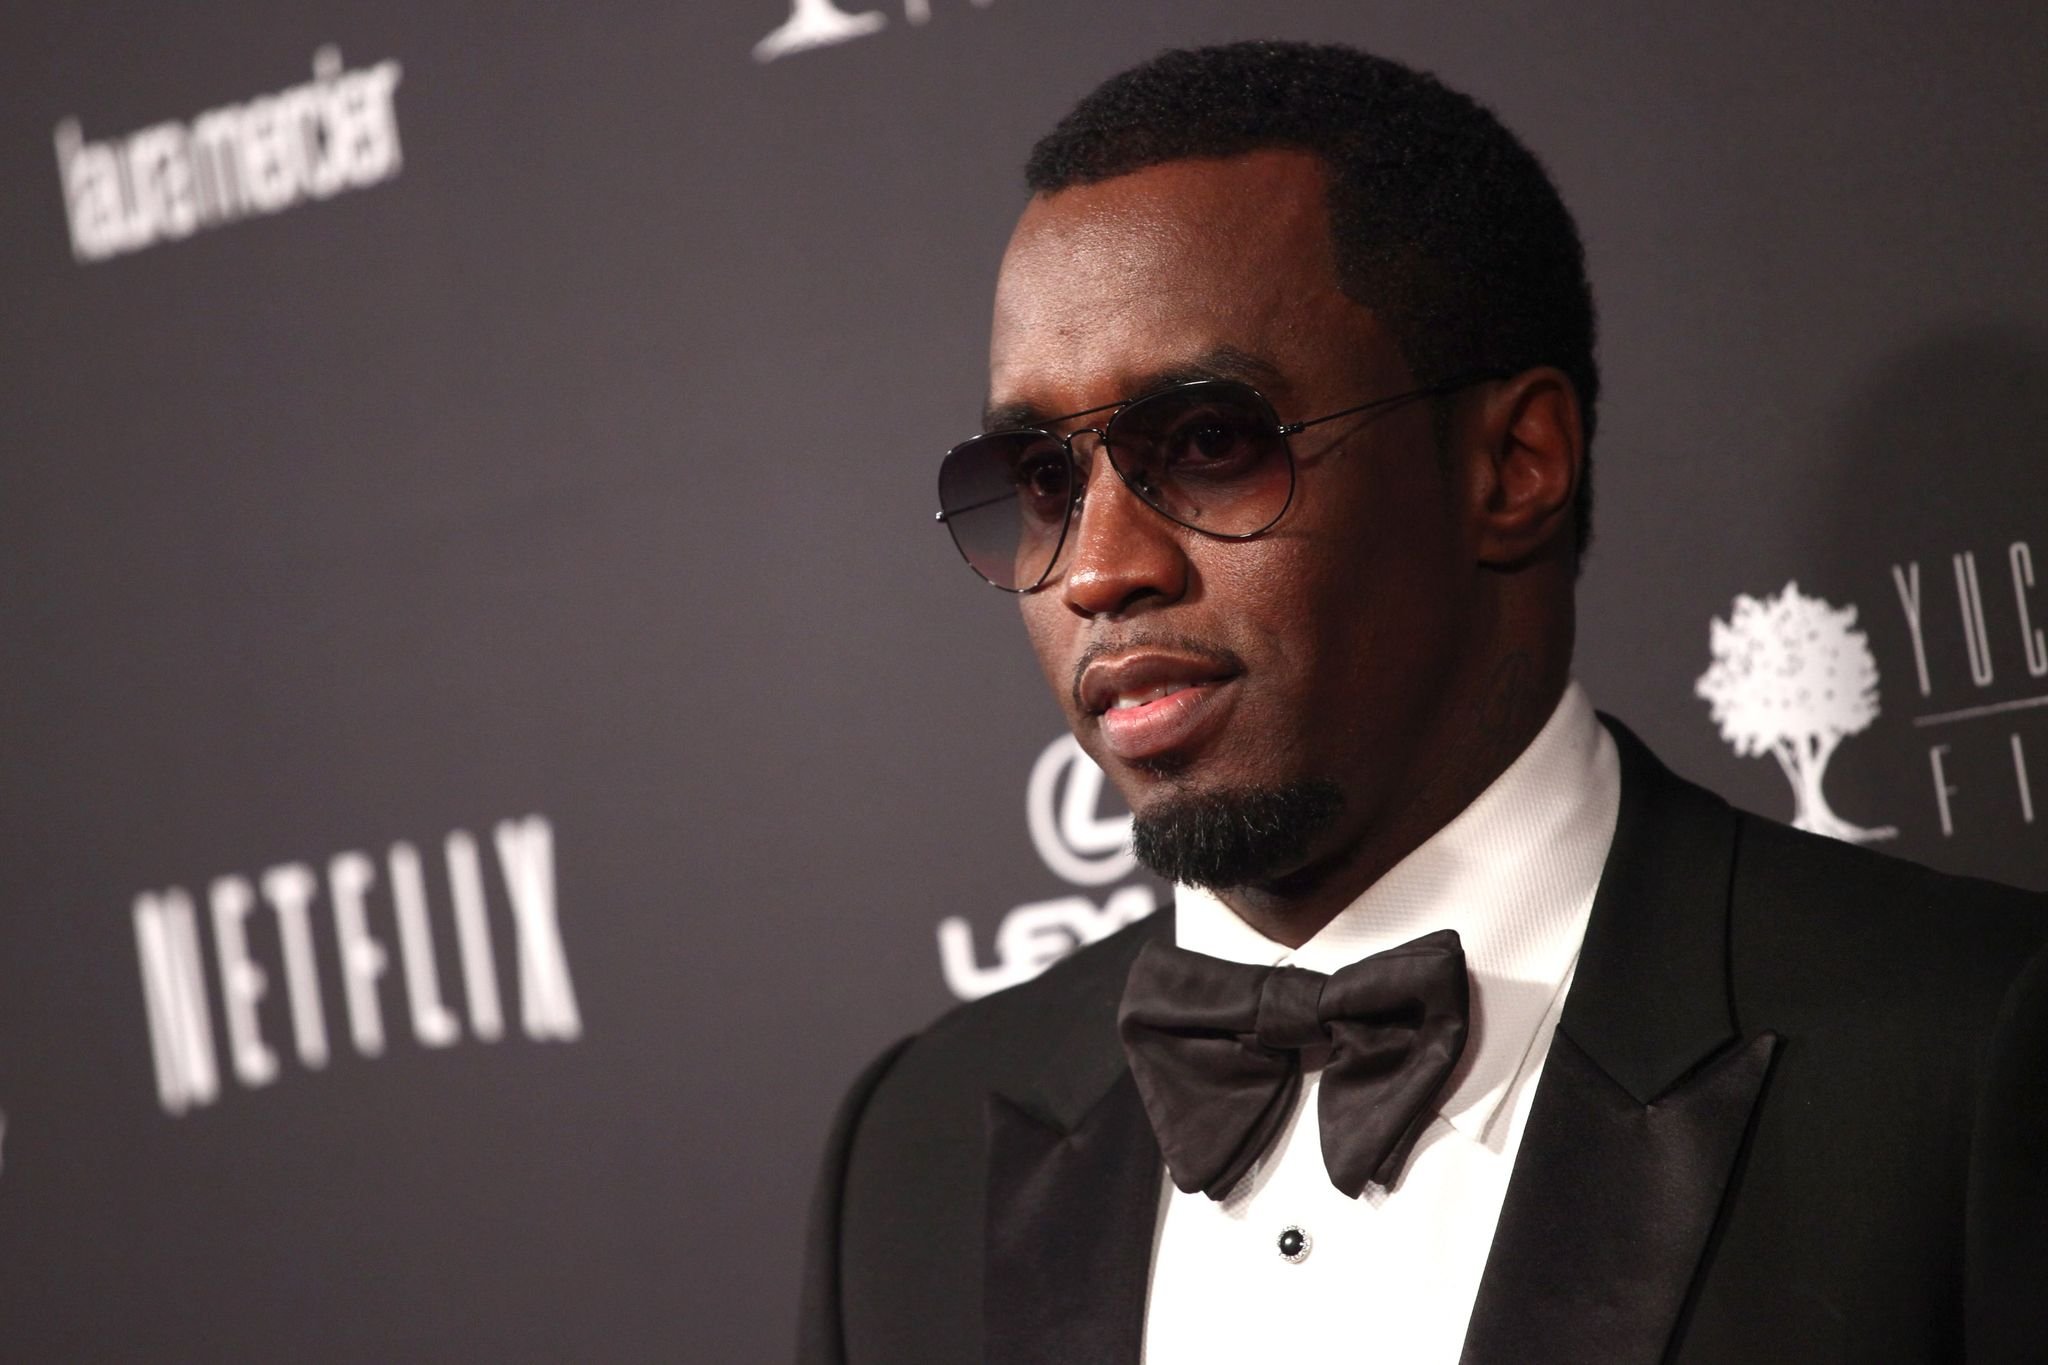 Sean Combs at the Weinstein Company's Golden Globe Awards after-party on January 12, 2014 in Beverly Hills, California | Photo: Getty Images